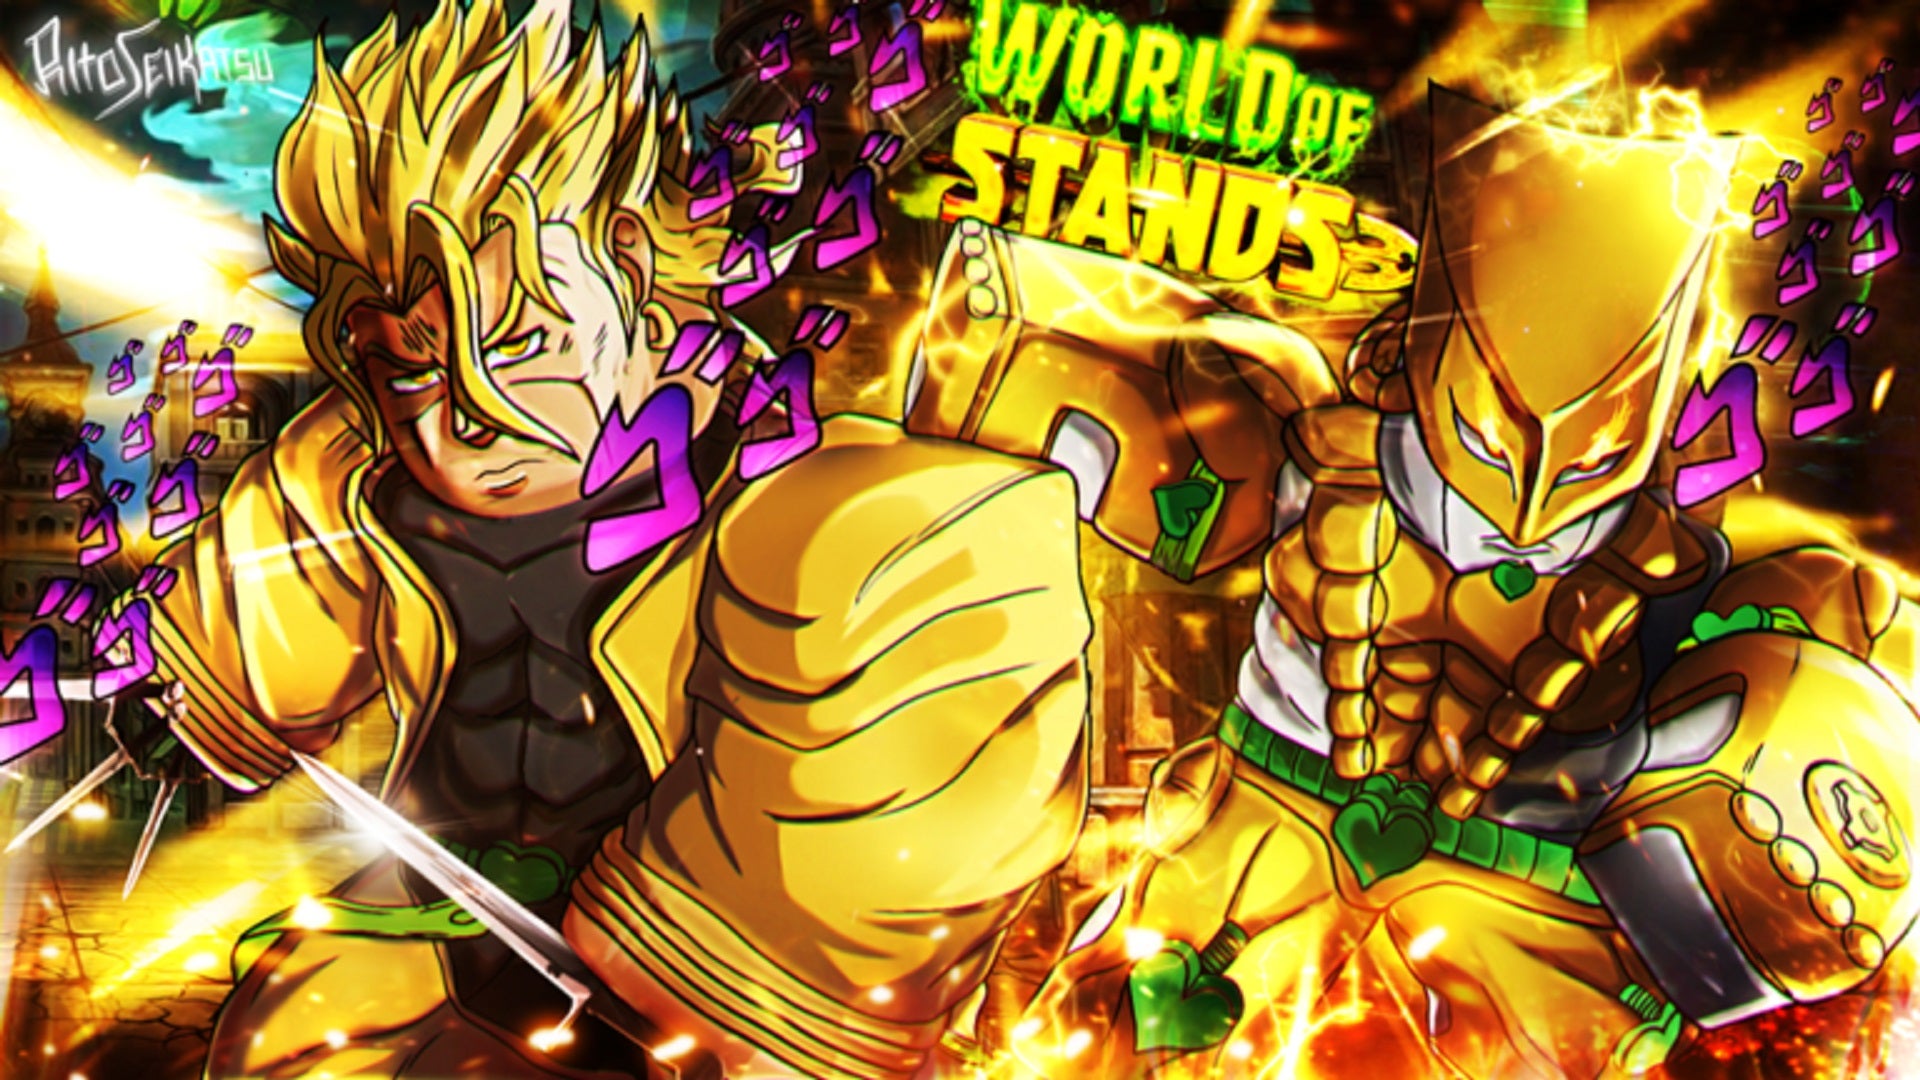 An incredibly busy gold-tinted anime-esque banner for the Roblox experience World Of Stands. It shows two characters making dramatic and serious faces against a flame-lit background.